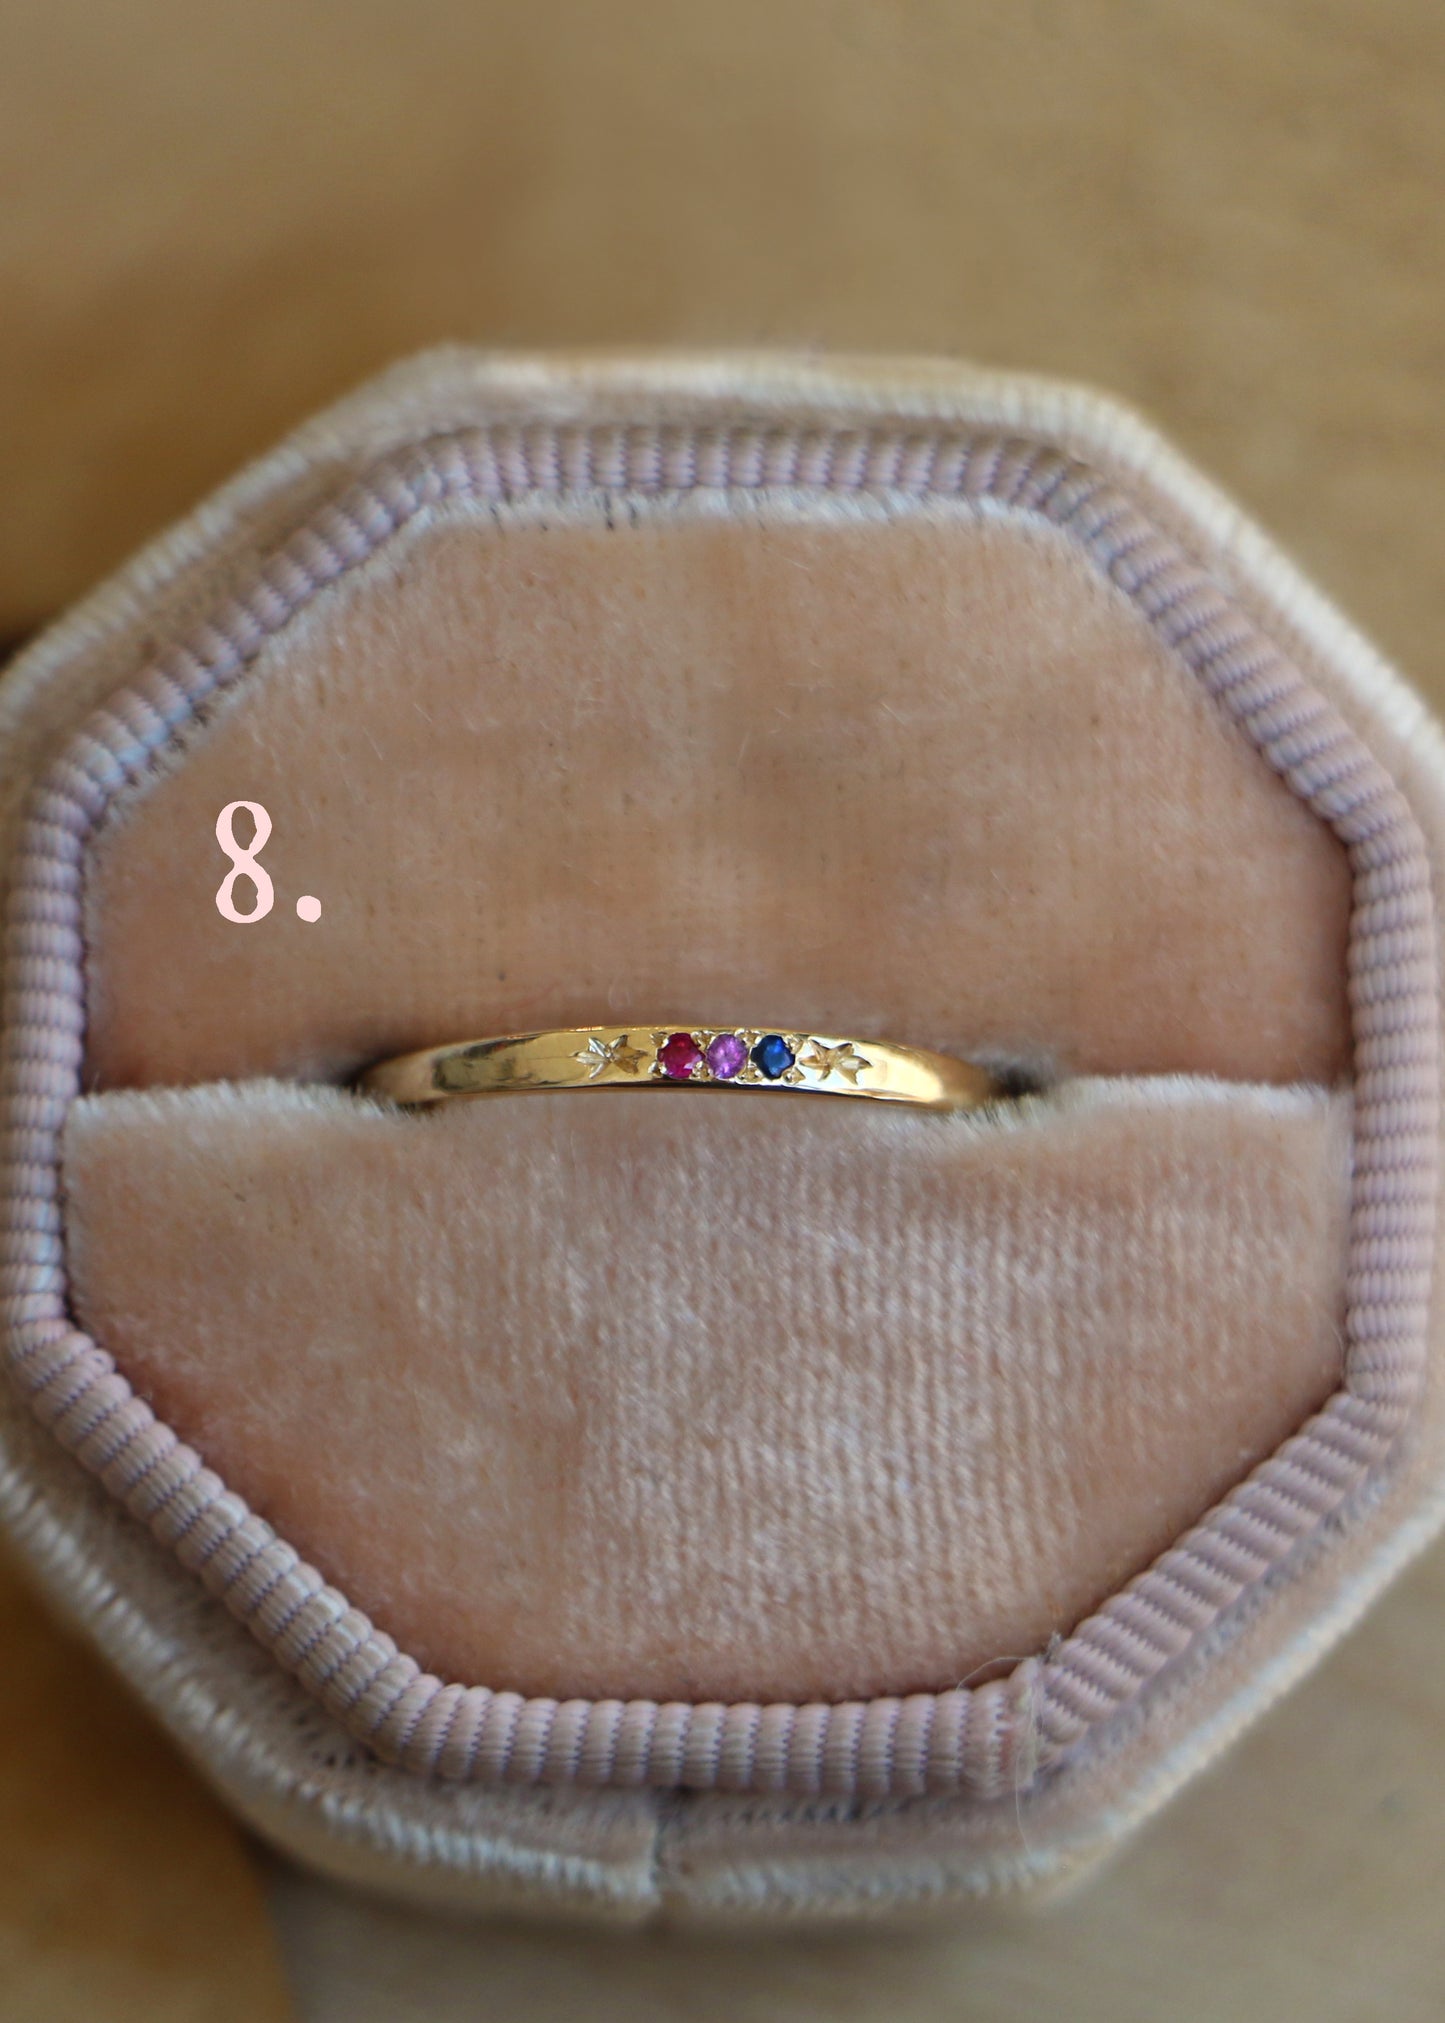 Exclusive! Adorned with Pride Ring